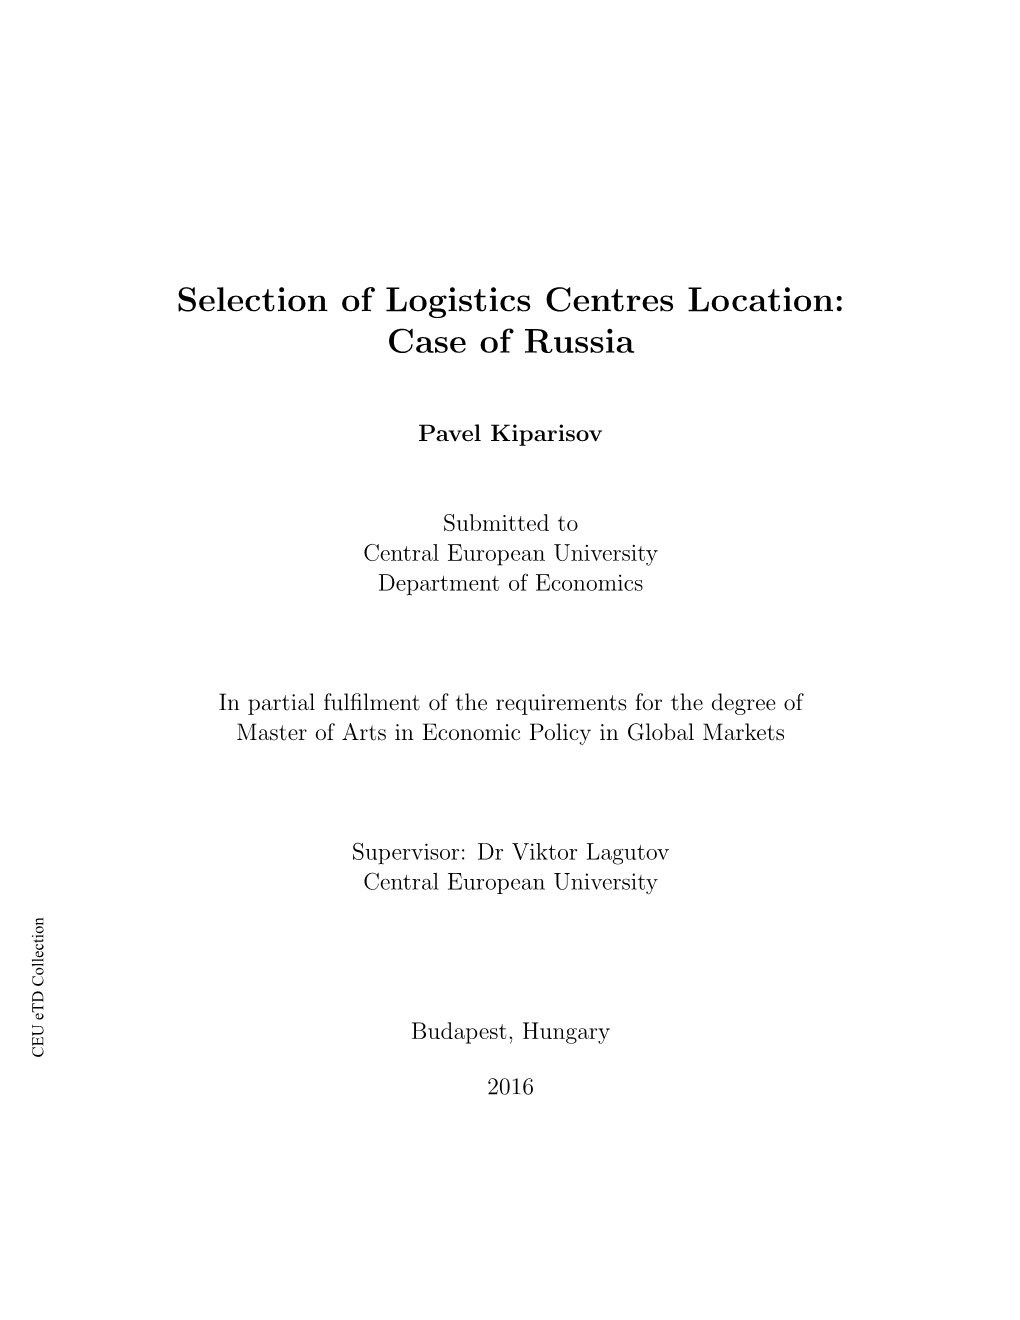 Selection of Logistics Centres Location: Case of Russia